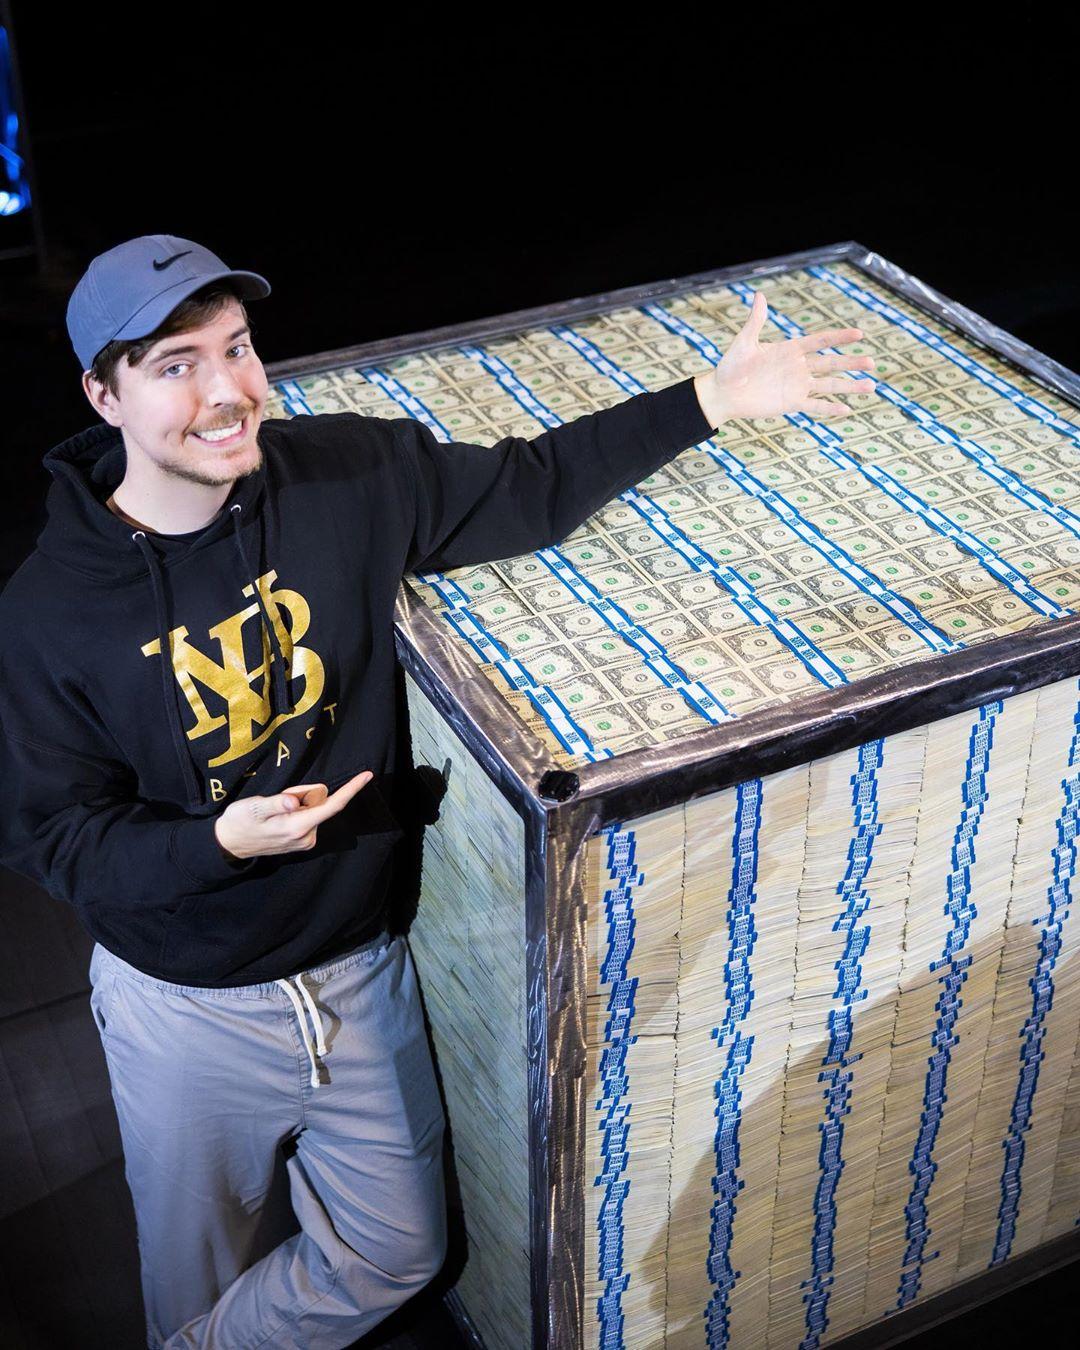 Mr Beast gives away millions of dollars